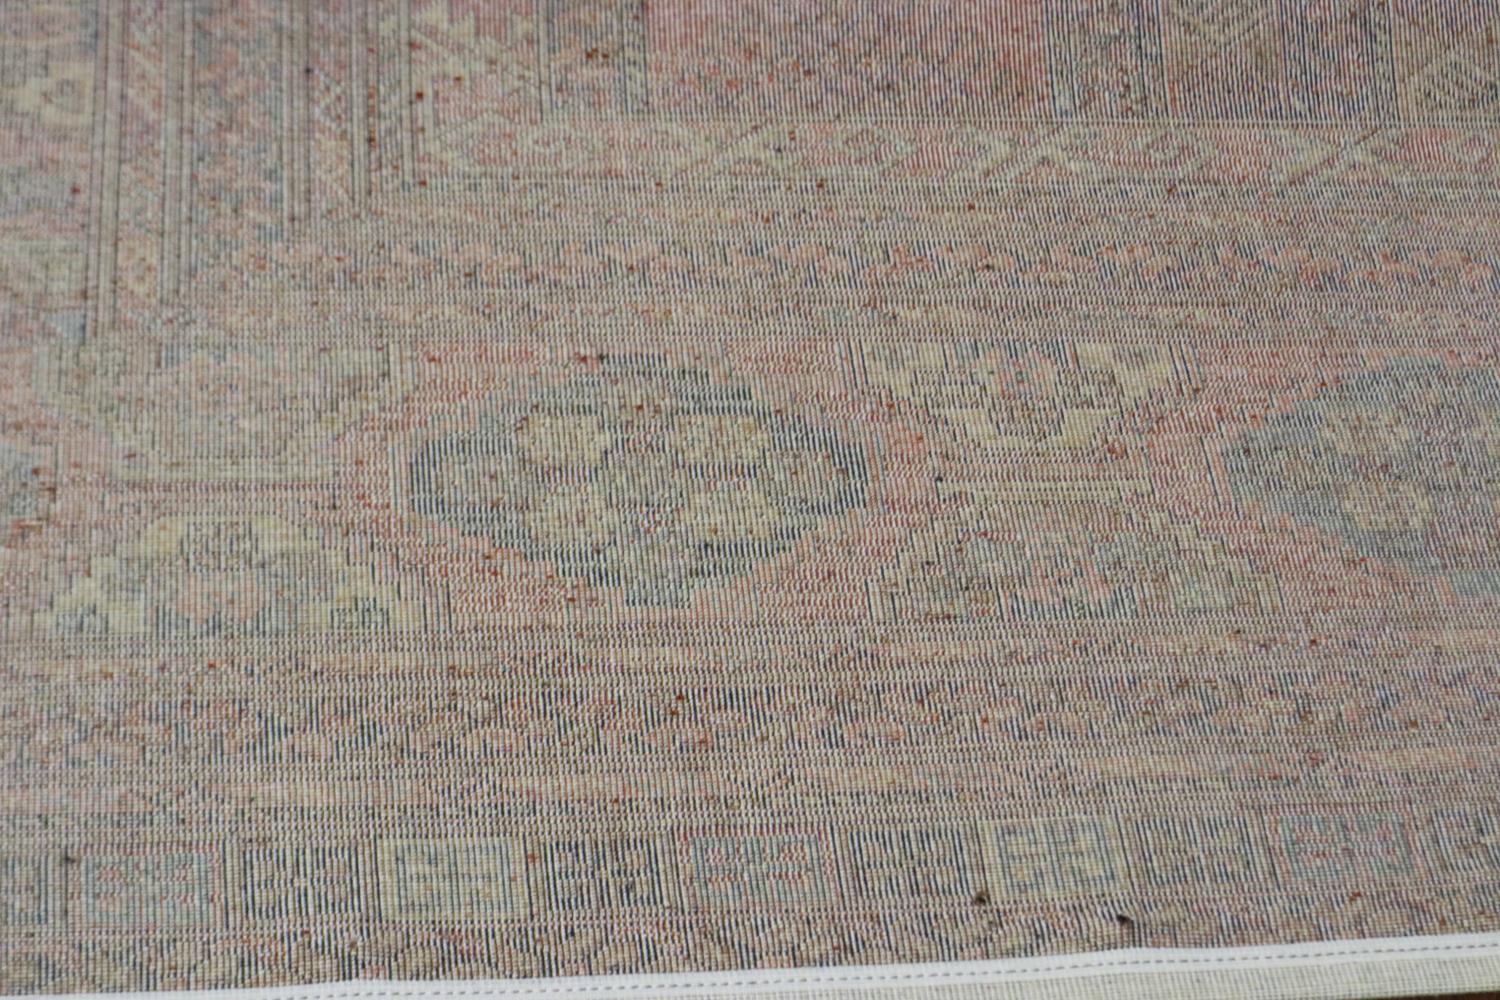 Mossoul red ground floor rug, 300 x 250 cm Not available for in-house P&P - Image 3 of 3